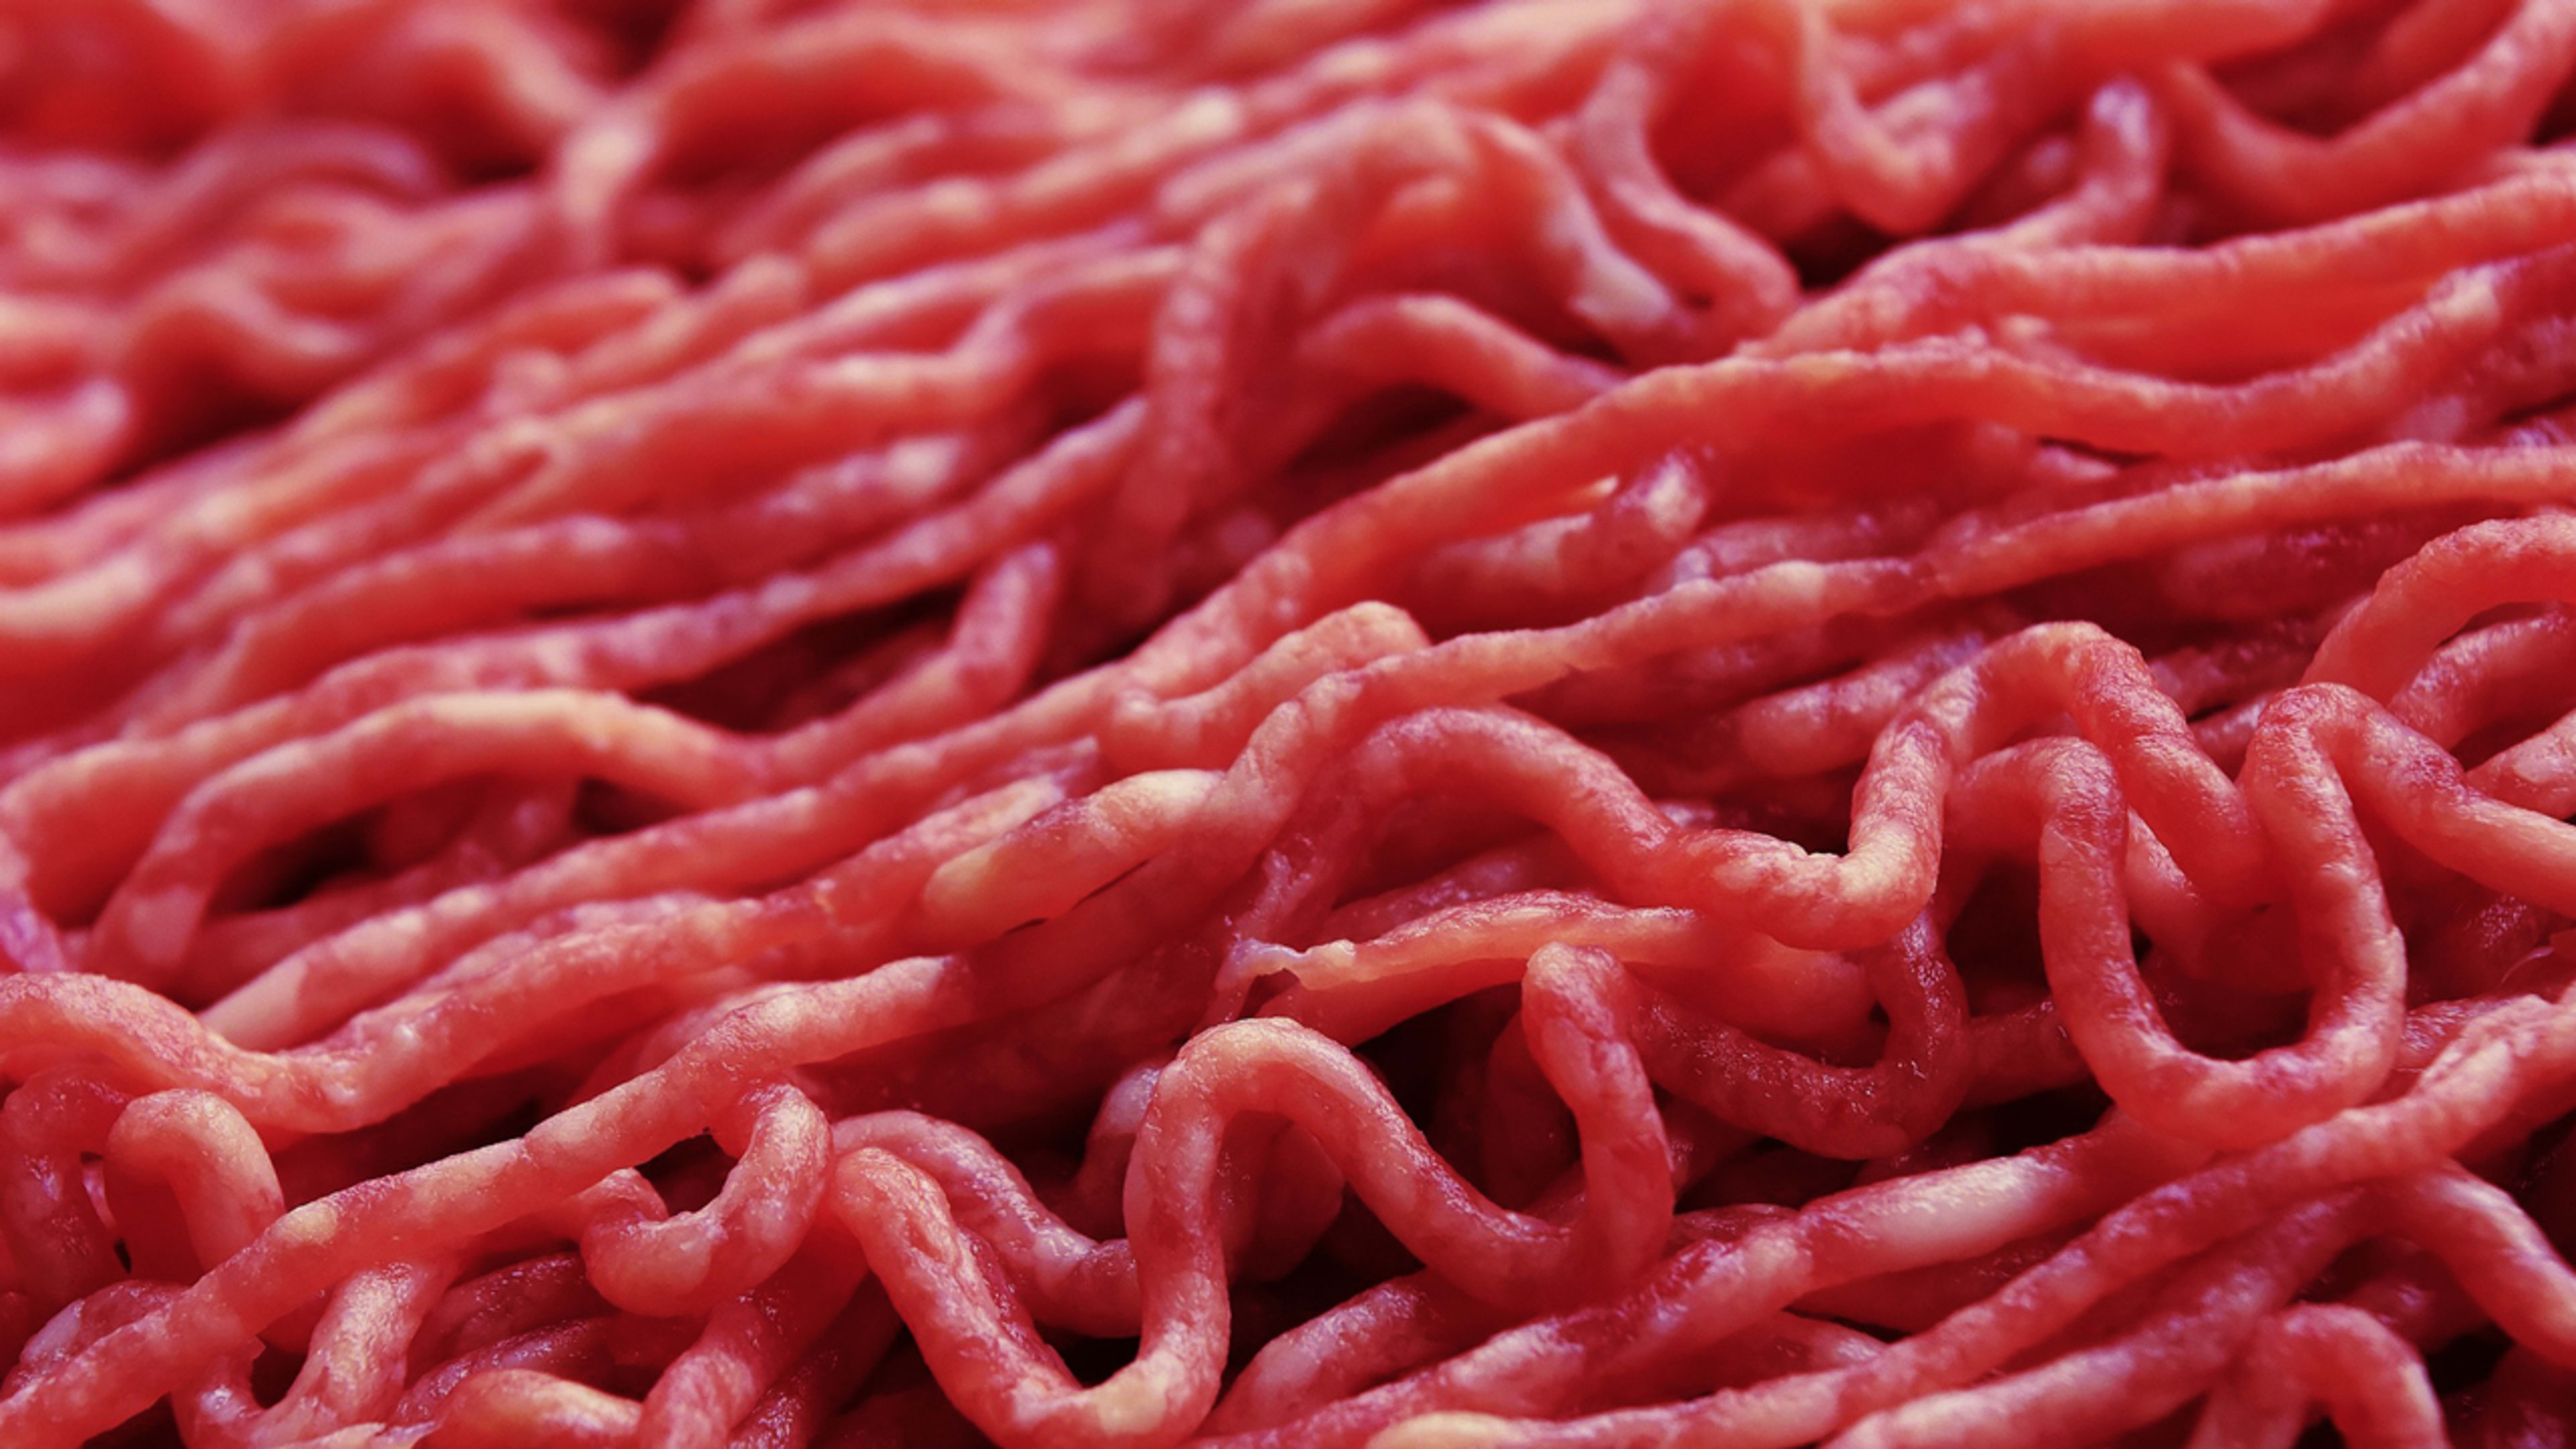 E. coli outbreak: What the CDC says you should know about the 10-state ground beef recall